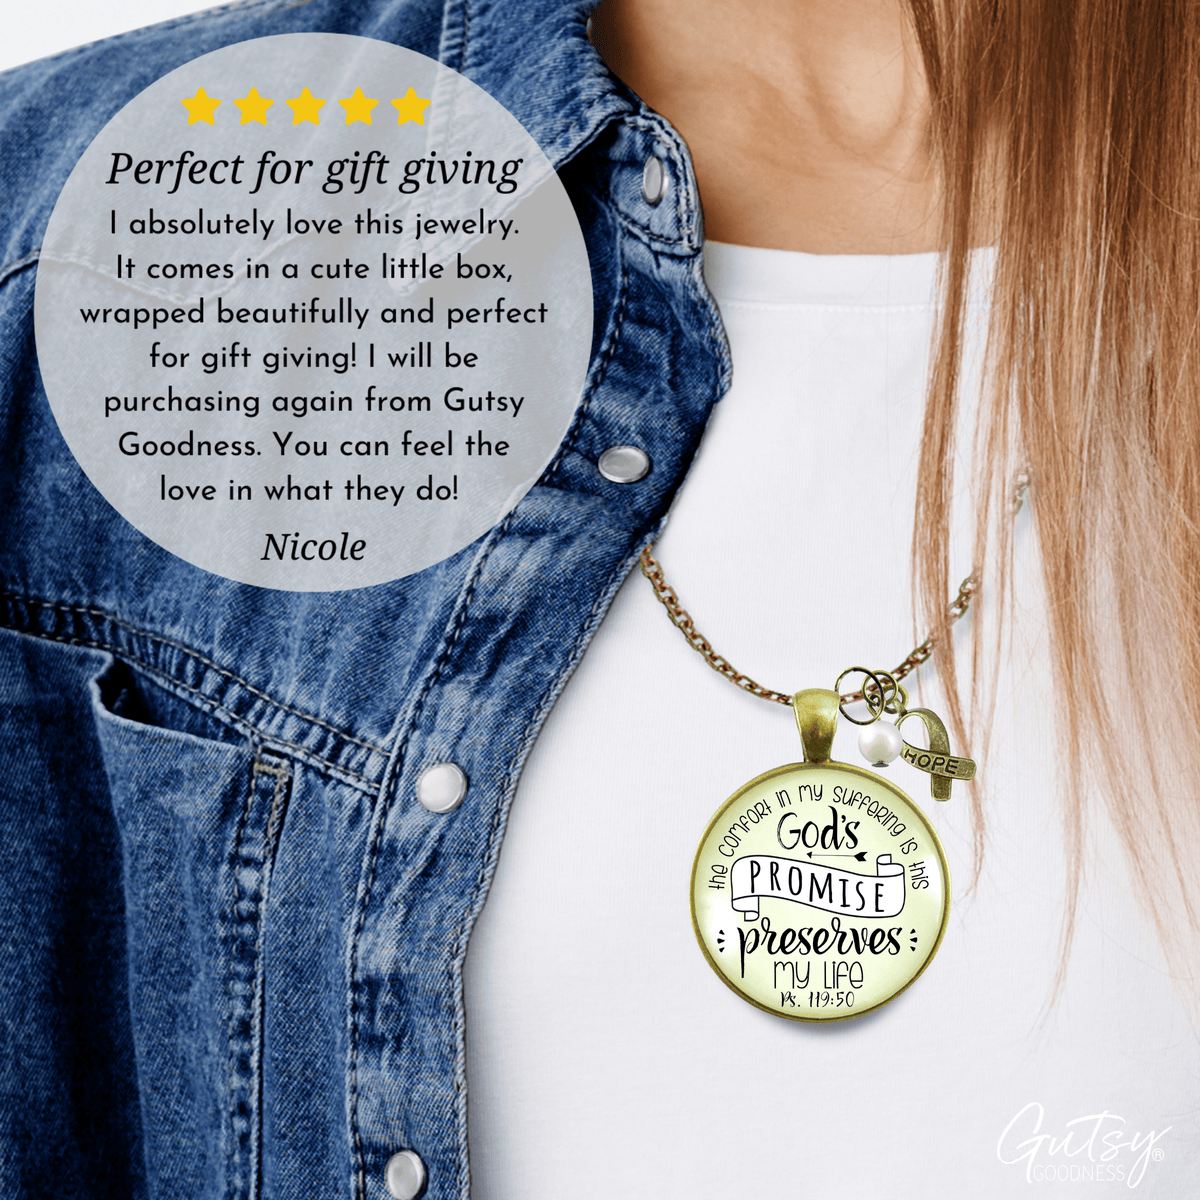 Gutsy Goodness Scripture Necklace Comfort in Suffering Gods Promise Psalm Jewelry - Gutsy Goodness;Scripture Necklace Comfort In Suffering Gods Promise Psalm Jewelry - Gutsy Goodness Handmade Jewelry Gifts